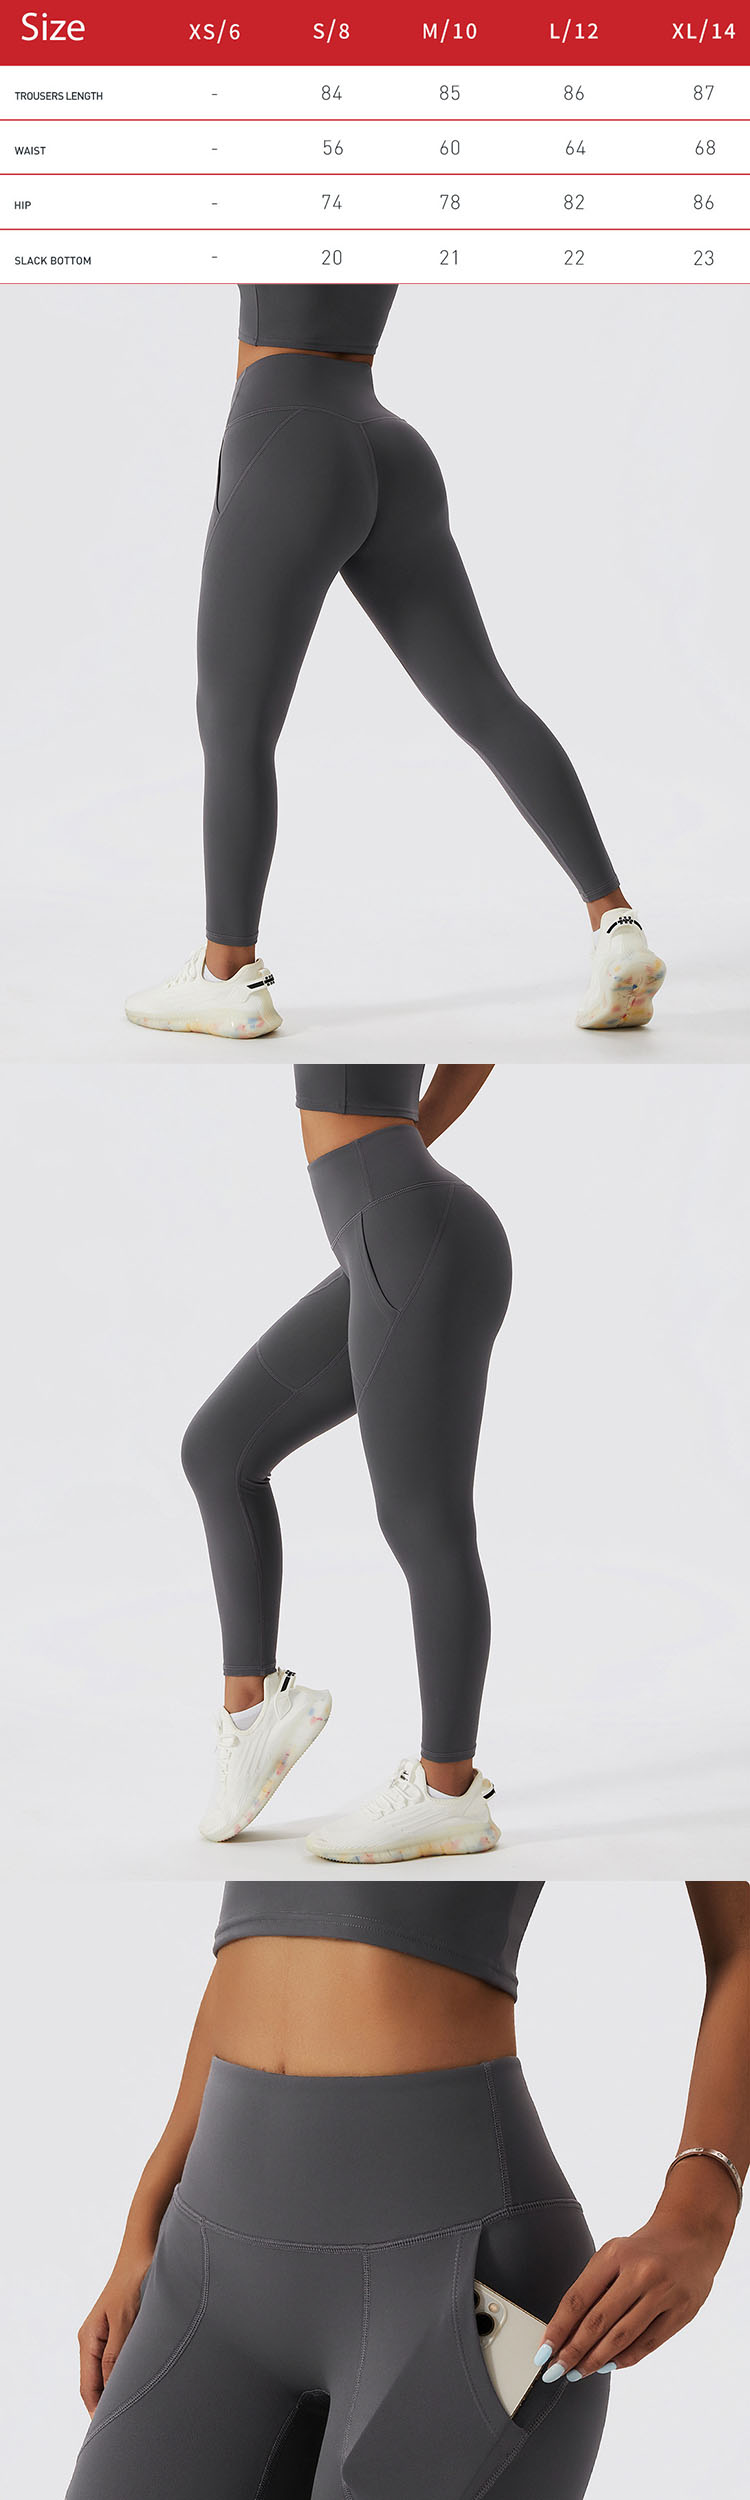 Best inexpensive yoga pants define the body line, create a vintage or modern look with color and line width